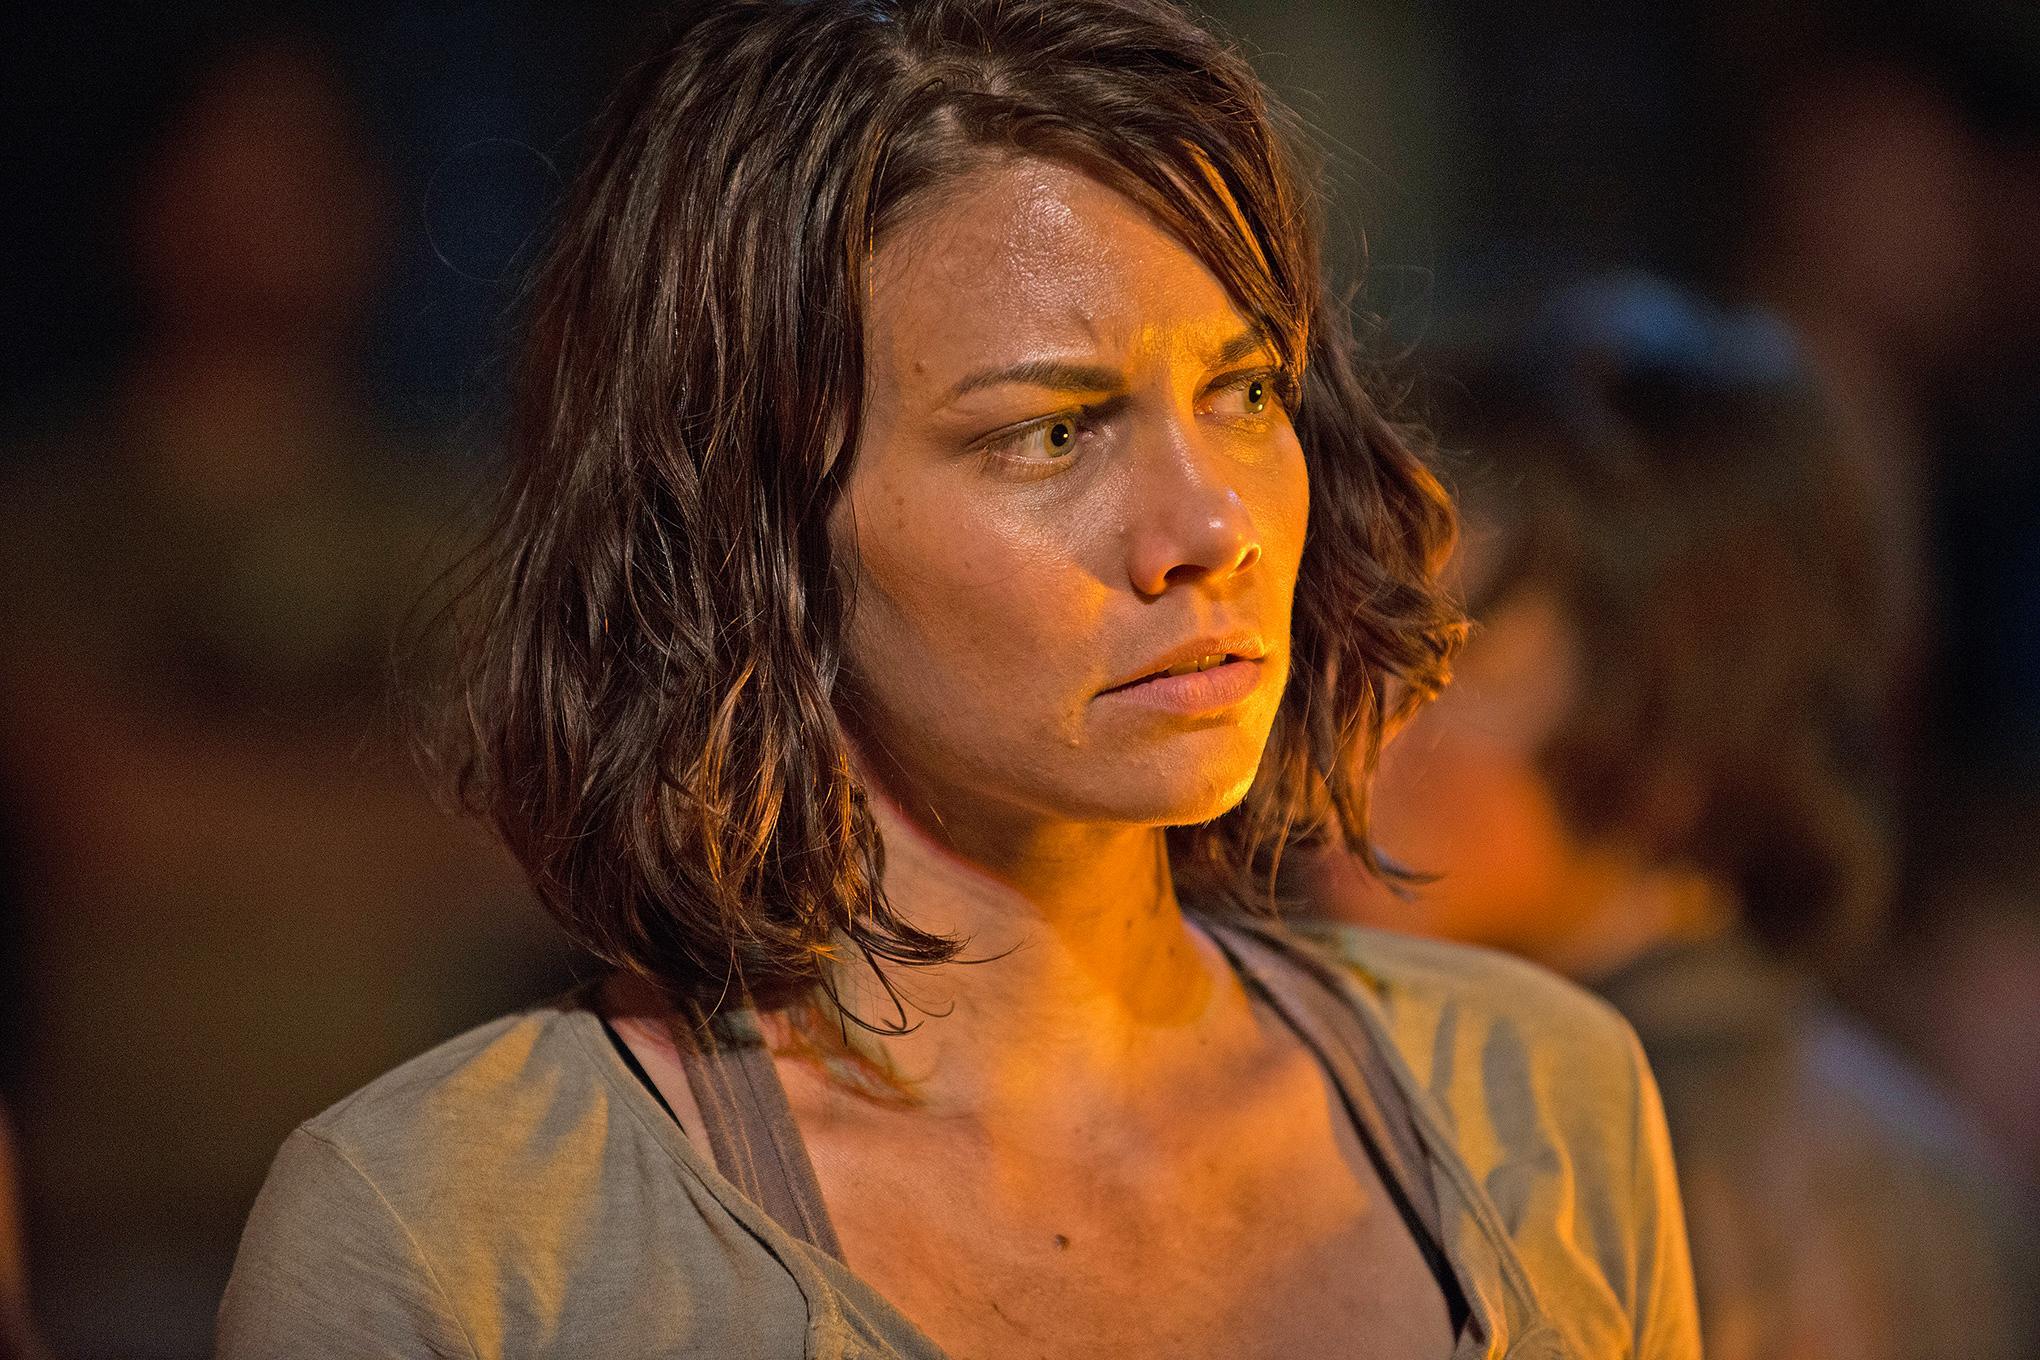 The Walking Deads Lauren Cohan Id Rather Have The Validation Of 5834